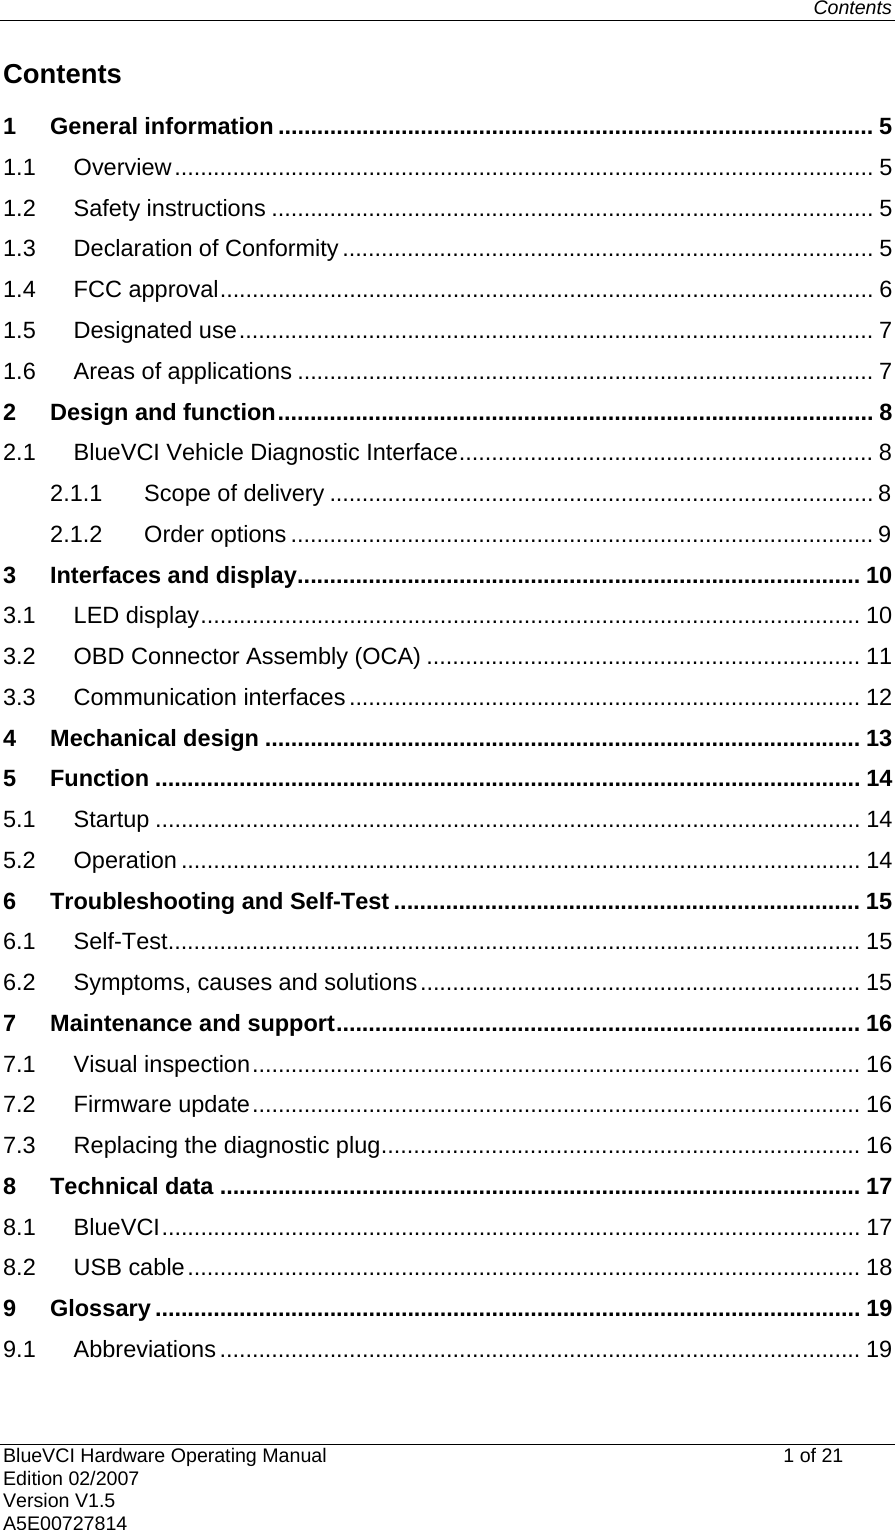 Contents   BlueVCI Hardware Operating Manual                                                   1 of 21 Edition 02/2007 Version V1.5 A5E00727814 Contents 1 General information ............................................................................................ 5 1.1 Overview............................................................................................................ 5 1.2 Safety instructions ............................................................................................. 5 1.3 Declaration of Conformity .................................................................................. 5 1.4 FCC approval..................................................................................................... 6 1.5 Designated use.................................................................................................. 7 1.6 Areas of applications ......................................................................................... 7 2 Design and function............................................................................................ 8 2.1 BlueVCI Vehicle Diagnostic Interface................................................................ 8 2.1.1 Scope of delivery .................................................................................... 8 2.1.2 Order options .......................................................................................... 9 3 Interfaces and display....................................................................................... 10 3.1 LED display...................................................................................................... 10 3.2 OBD Connector Assembly (OCA) ................................................................... 11 3.3 Communication interfaces ............................................................................... 12 4 Mechanical design ............................................................................................ 13 5 Function ............................................................................................................. 14 5.1 Startup ............................................................................................................. 14 5.2 Operation ......................................................................................................... 14 6 Troubleshooting and Self-Test ........................................................................ 15 6.1 Self-Test........................................................................................................... 15 6.2 Symptoms, causes and solutions.................................................................... 15 7 Maintenance and support................................................................................. 16 7.1 Visual inspection.............................................................................................. 16 7.2 Firmware update.............................................................................................. 16 7.3 Replacing the diagnostic plug.......................................................................... 16 8 Technical data ................................................................................................... 17 8.1 BlueVCI............................................................................................................ 17 8.2 USB cable........................................................................................................ 18 9 Glossary ............................................................................................................. 19 9.1 Abbreviations ................................................................................................... 19 